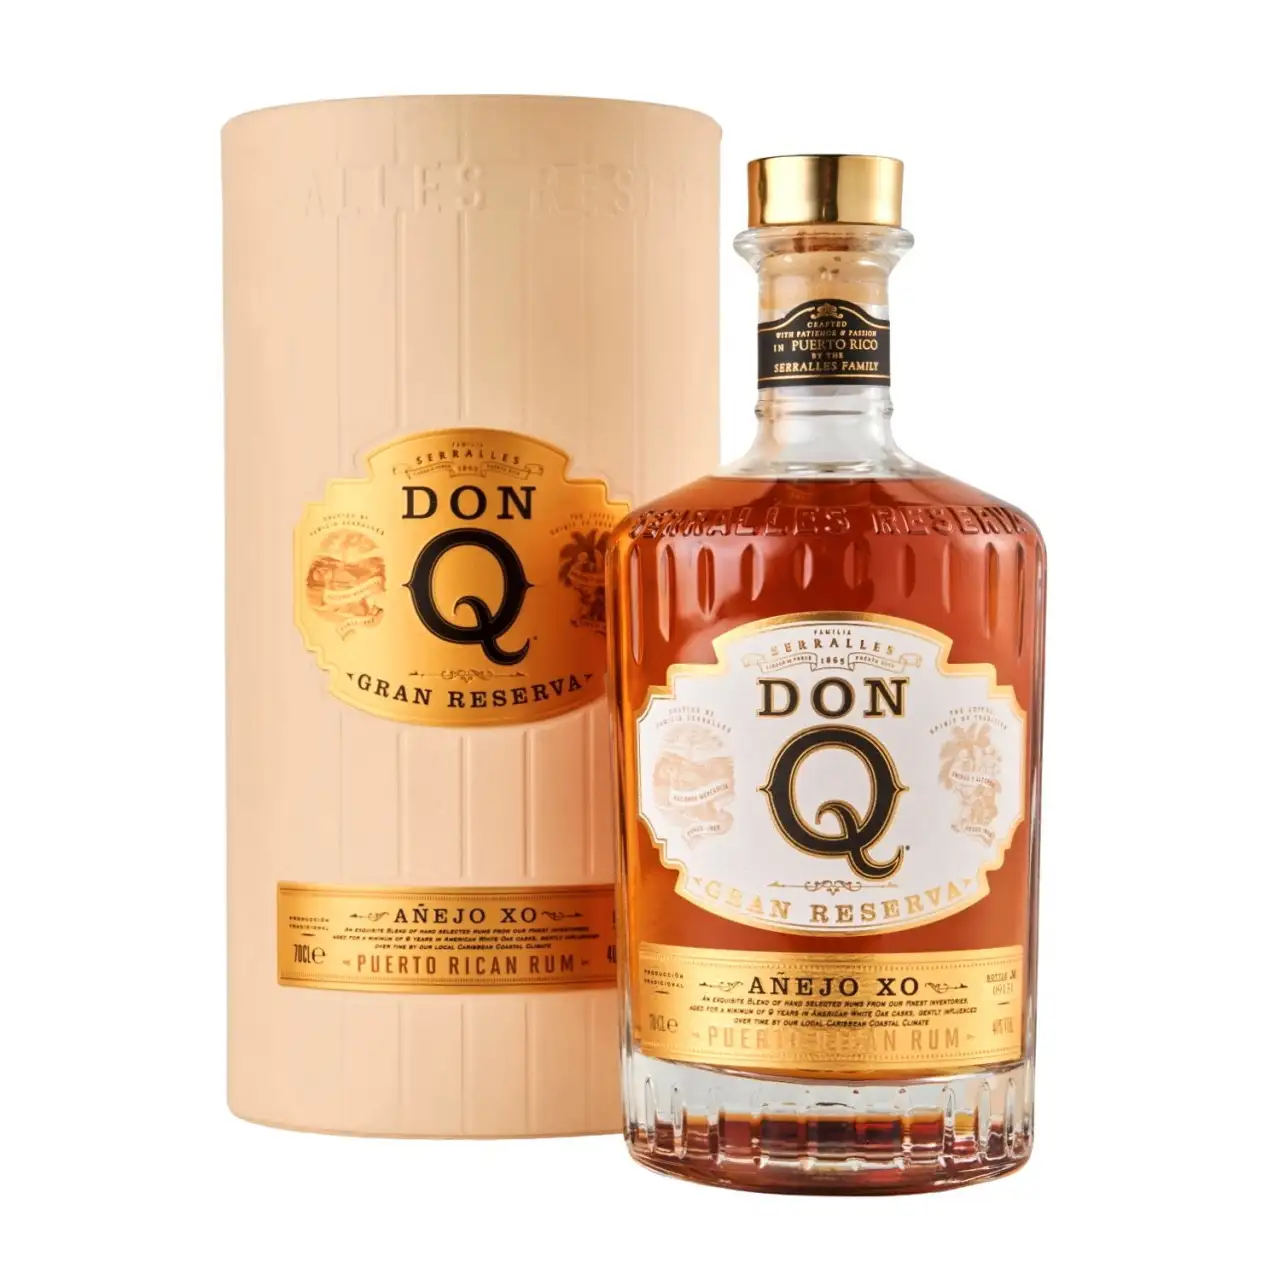 Image of the front of the bottle of the rum Don Q Añejo XO